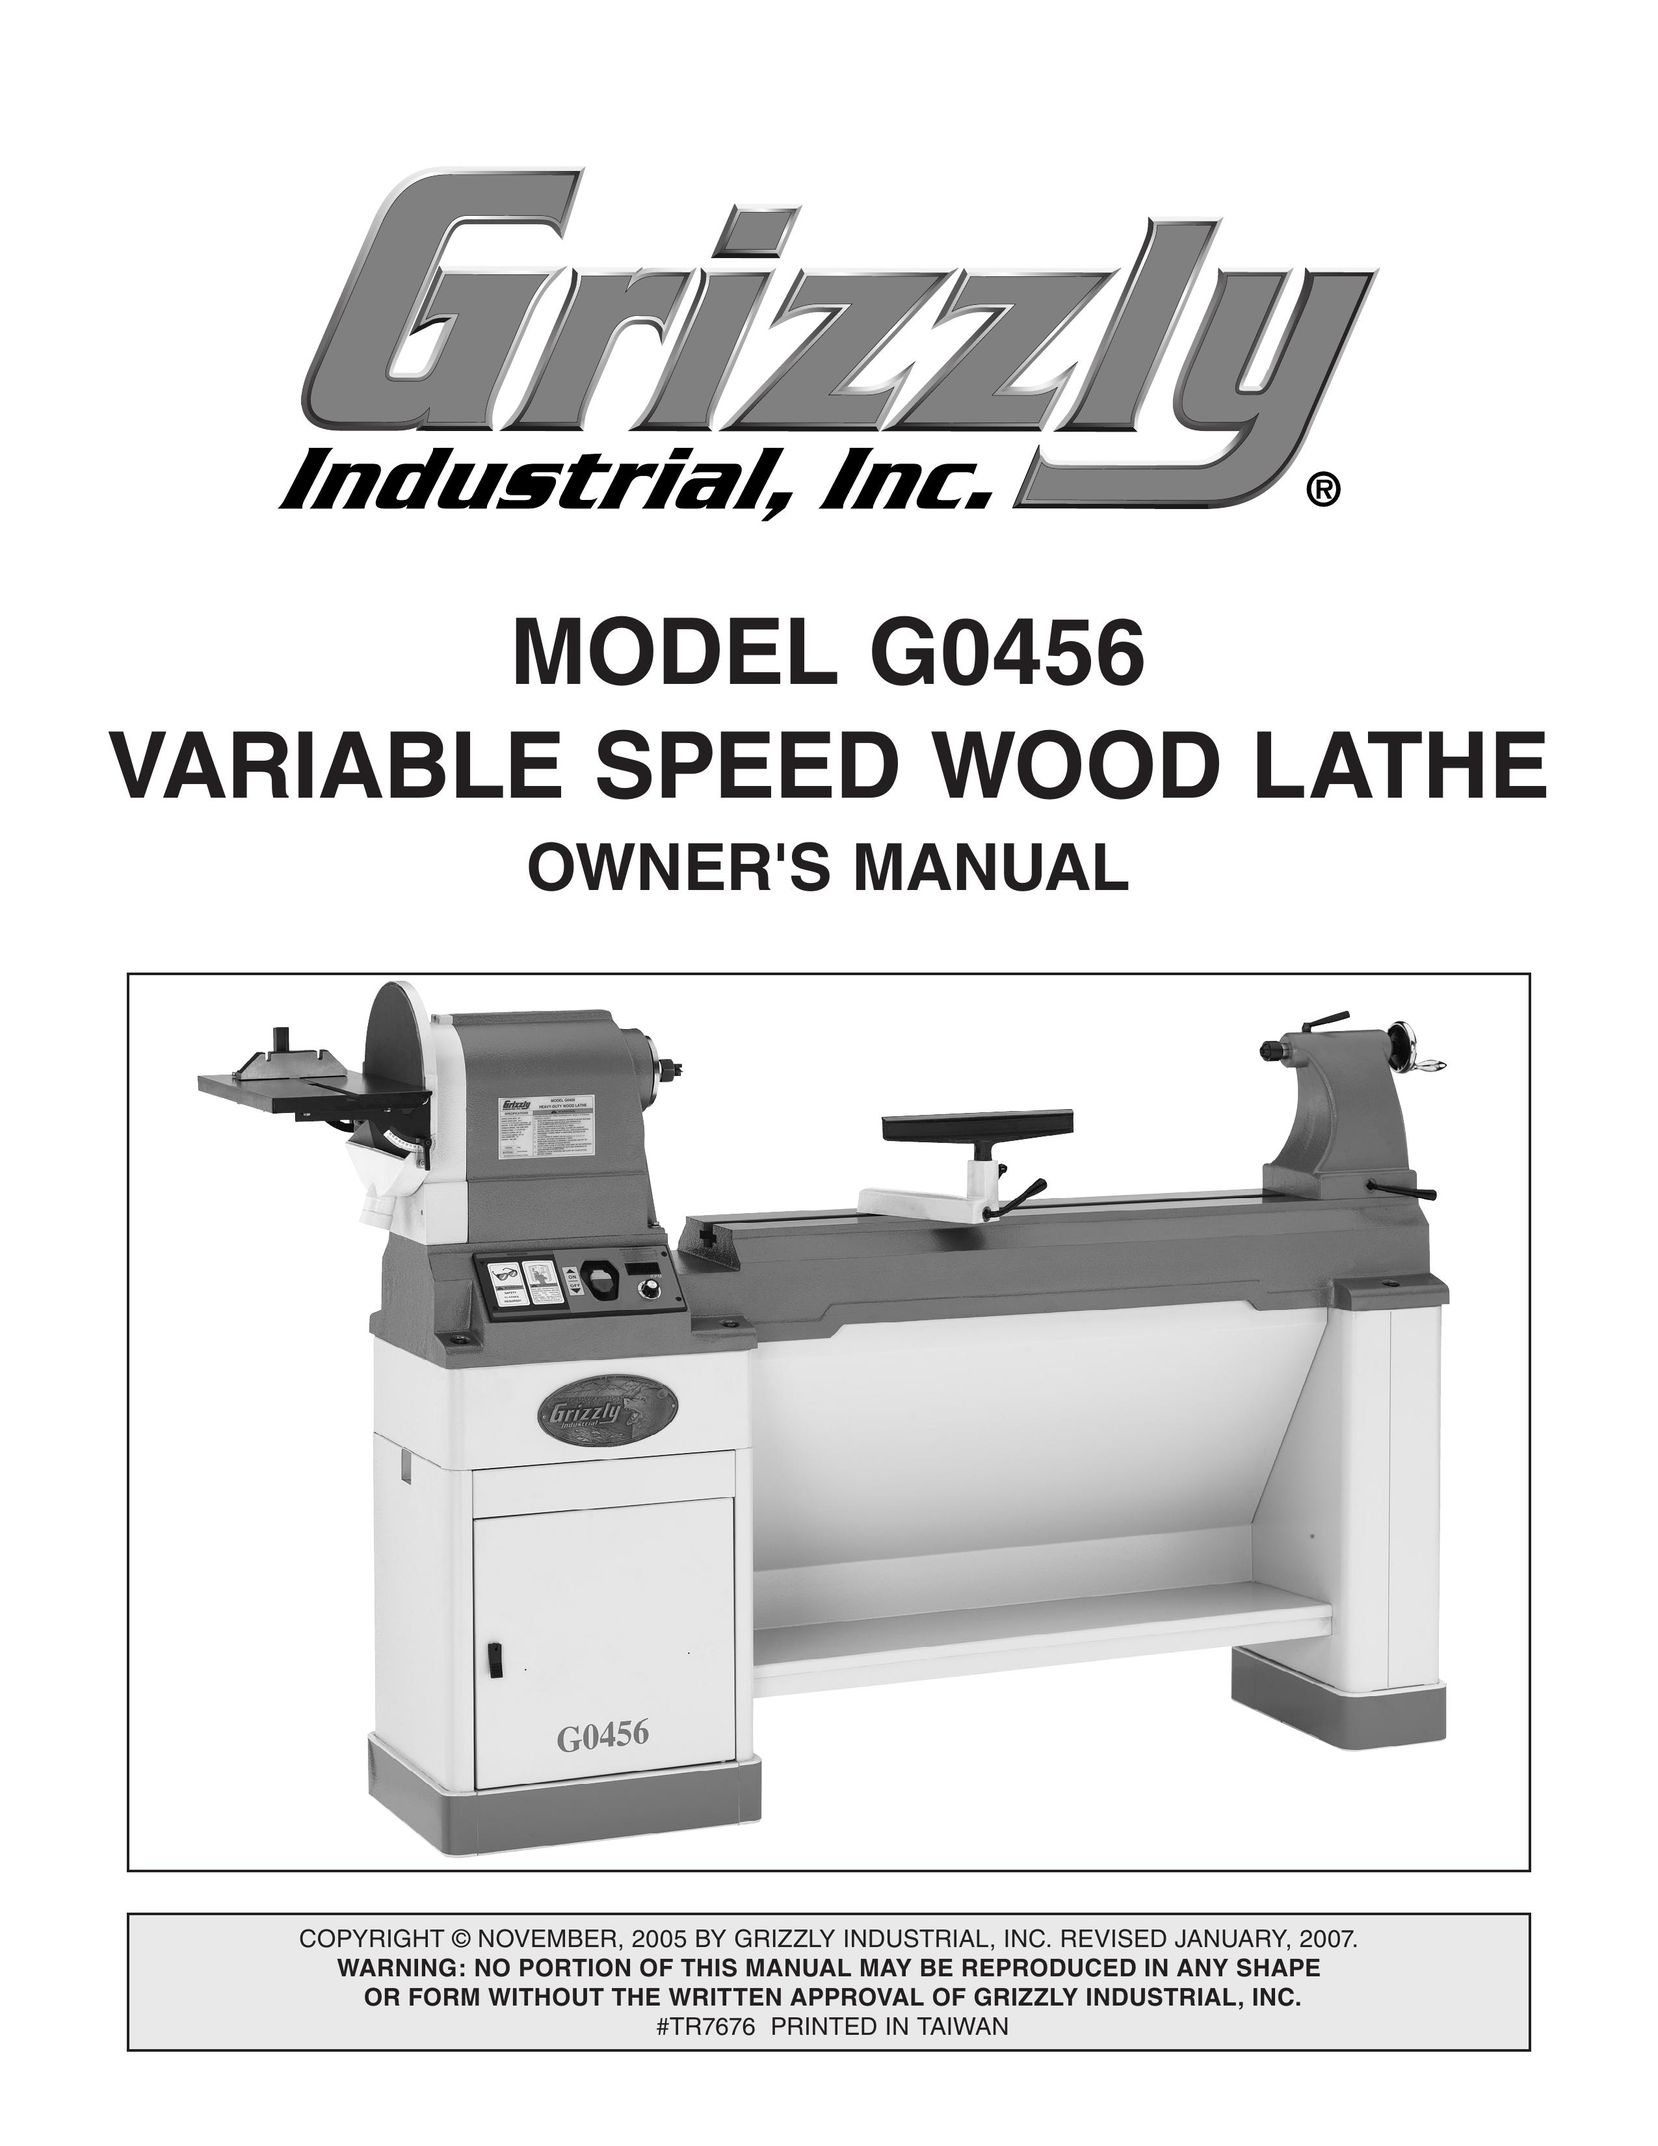 Grizzly G0456 Lathe User Manual